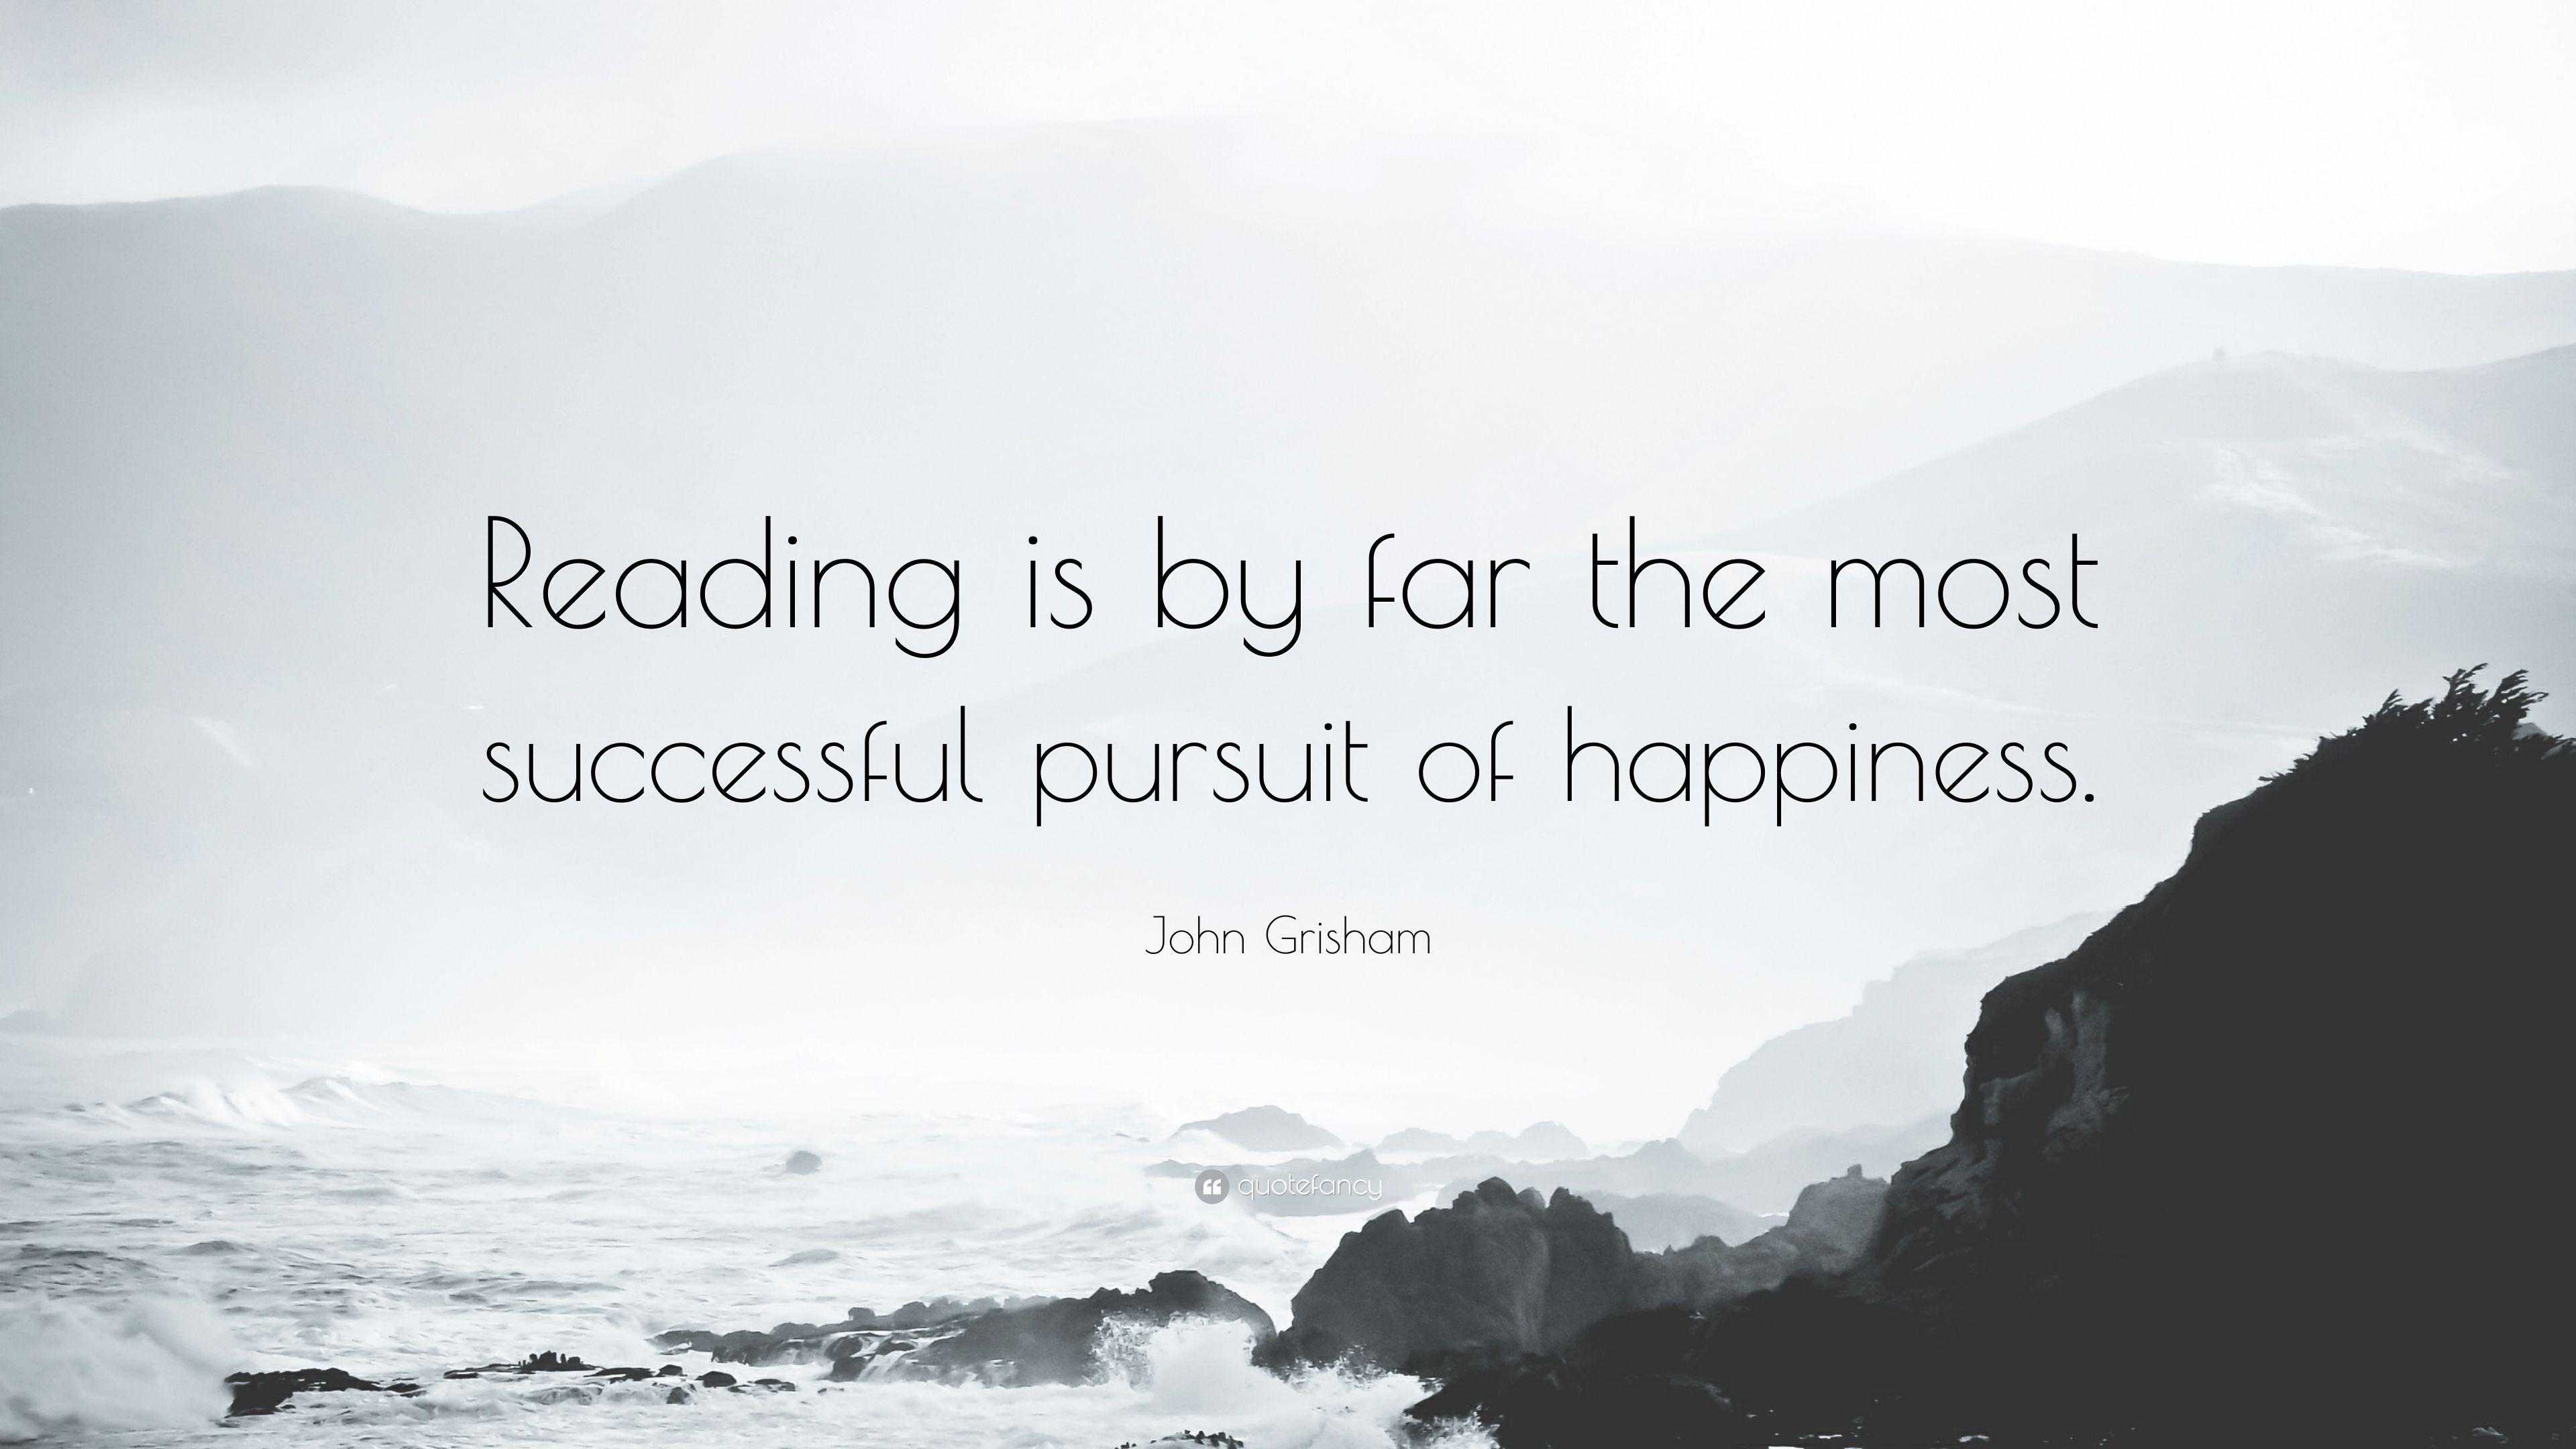 John Grisham Quote: “Reading is by far the most successful pursuit